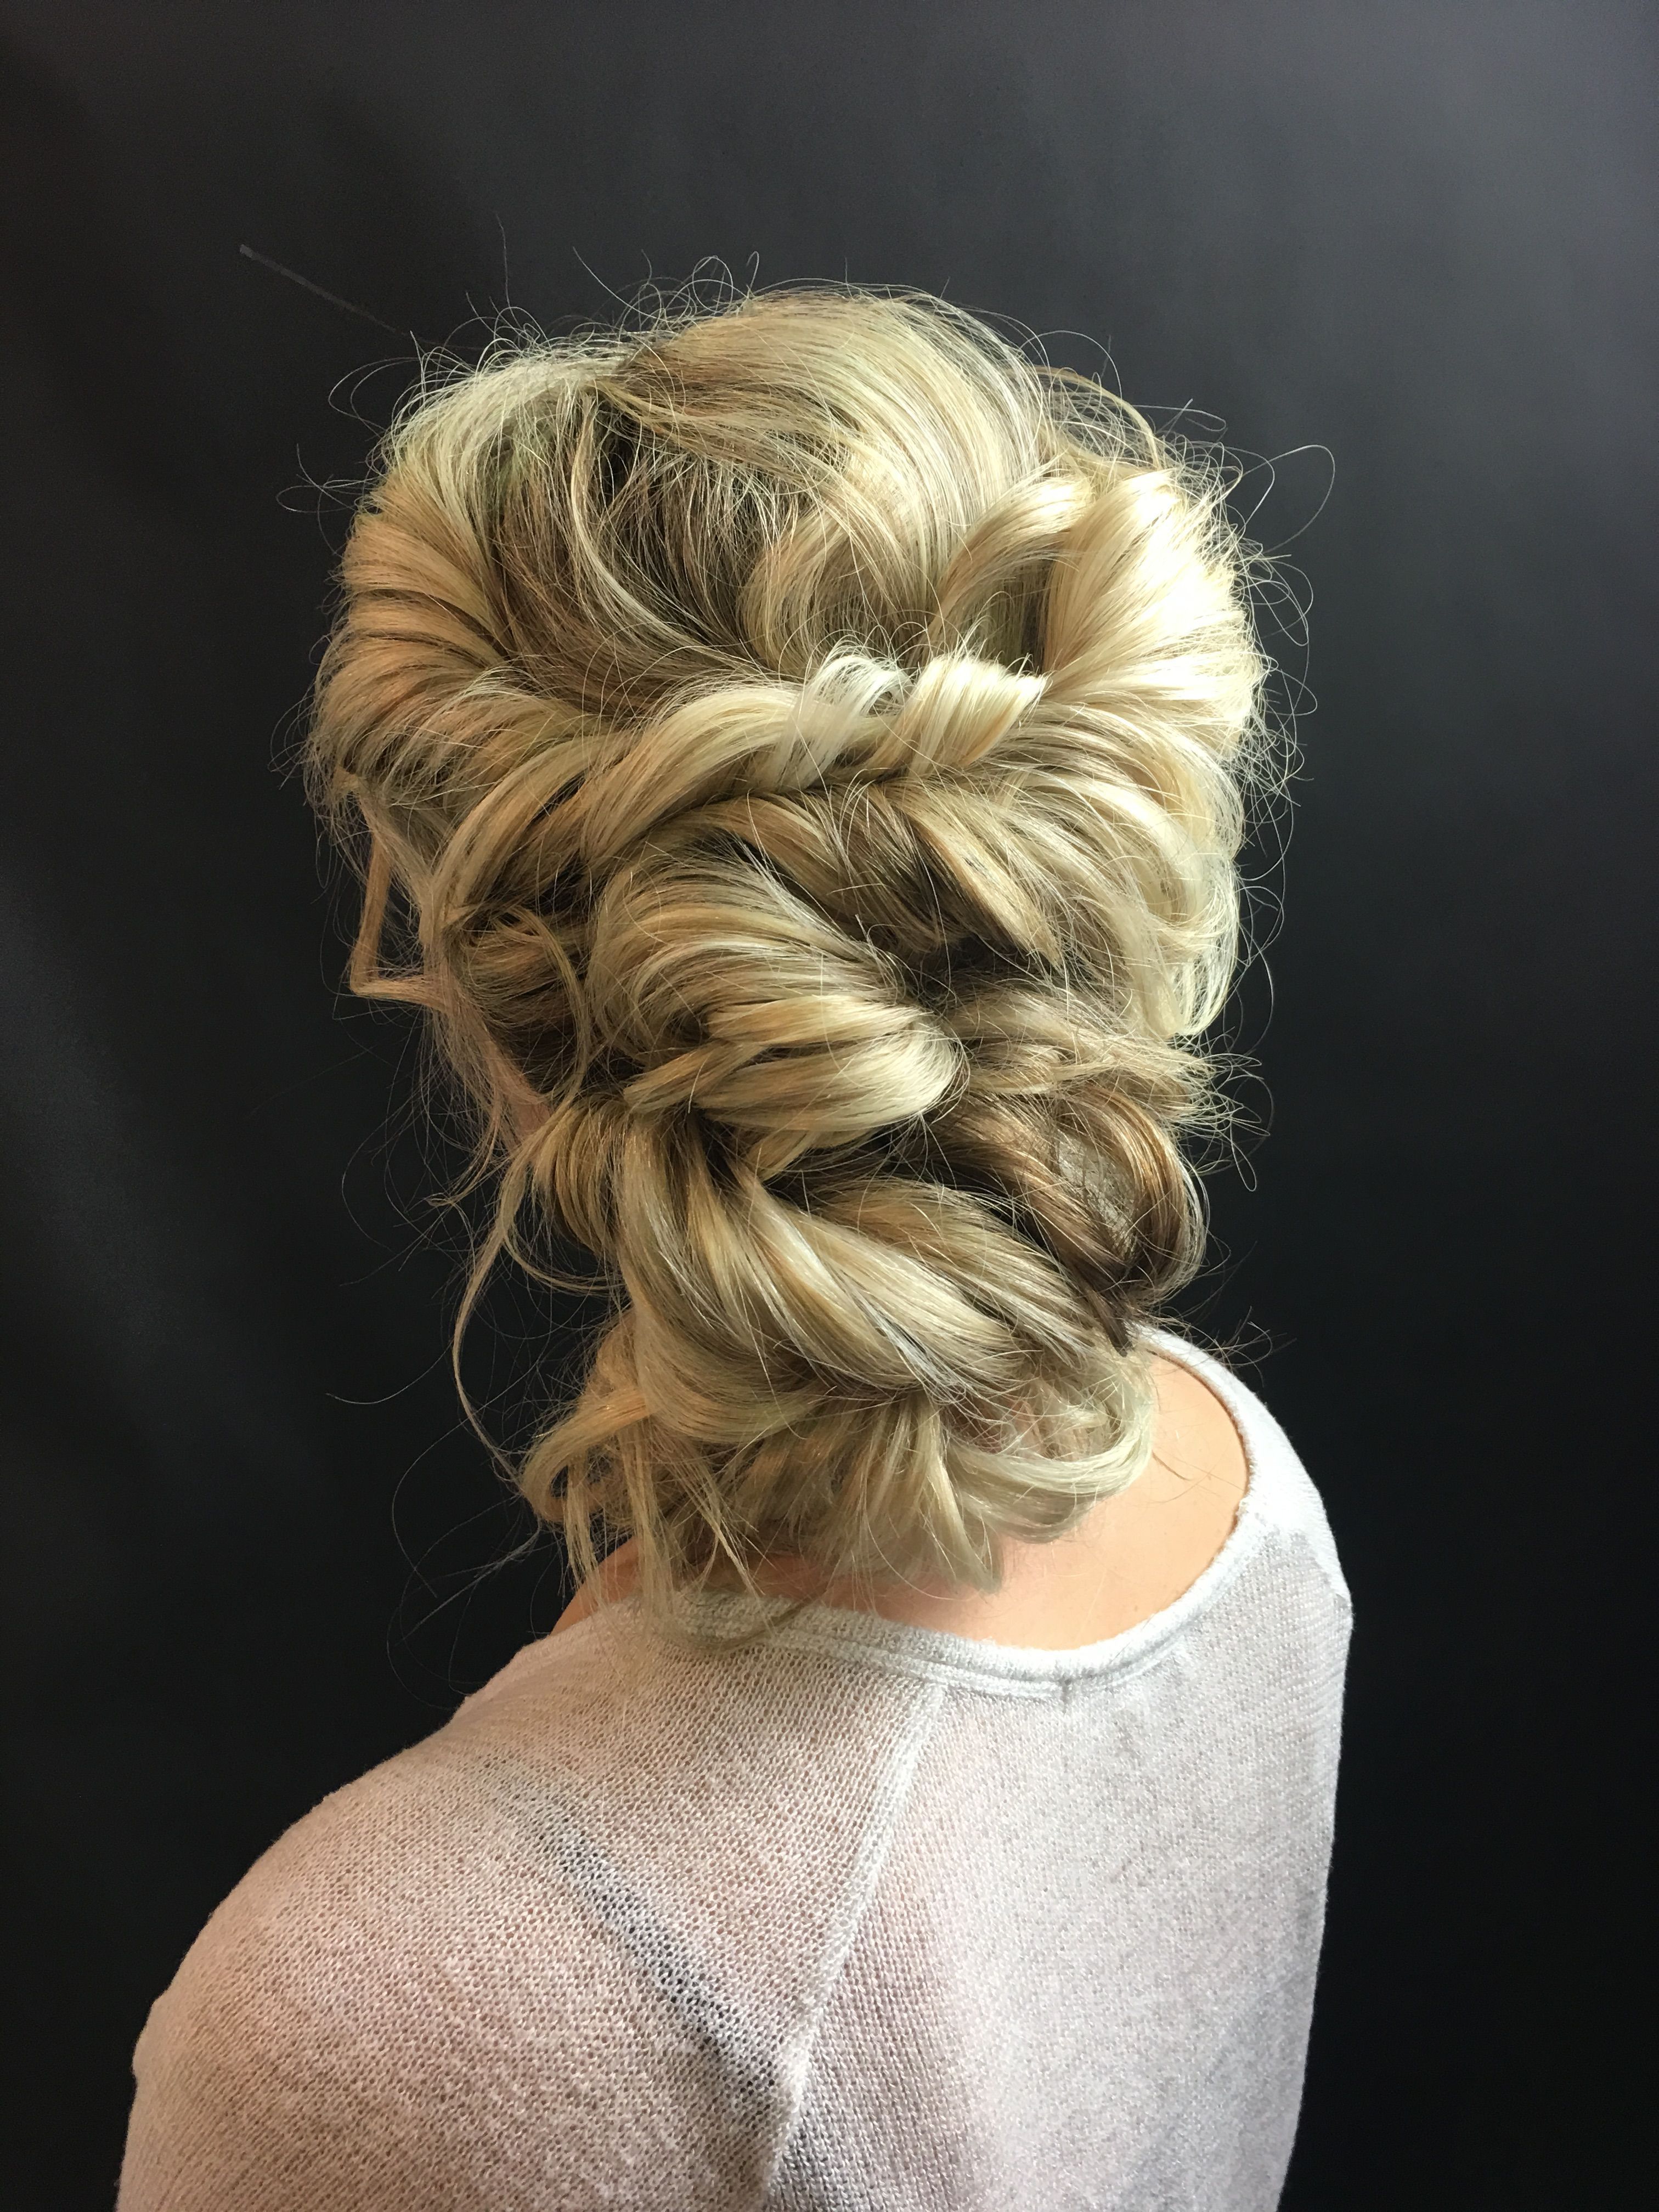 Most Recent Twisted Low Bun Hairstyles For Prom Within Hairstyles : Hair Twisted Updo Bun Low Wedding Style Plus Hairstyles (Gallery 19 of 20)